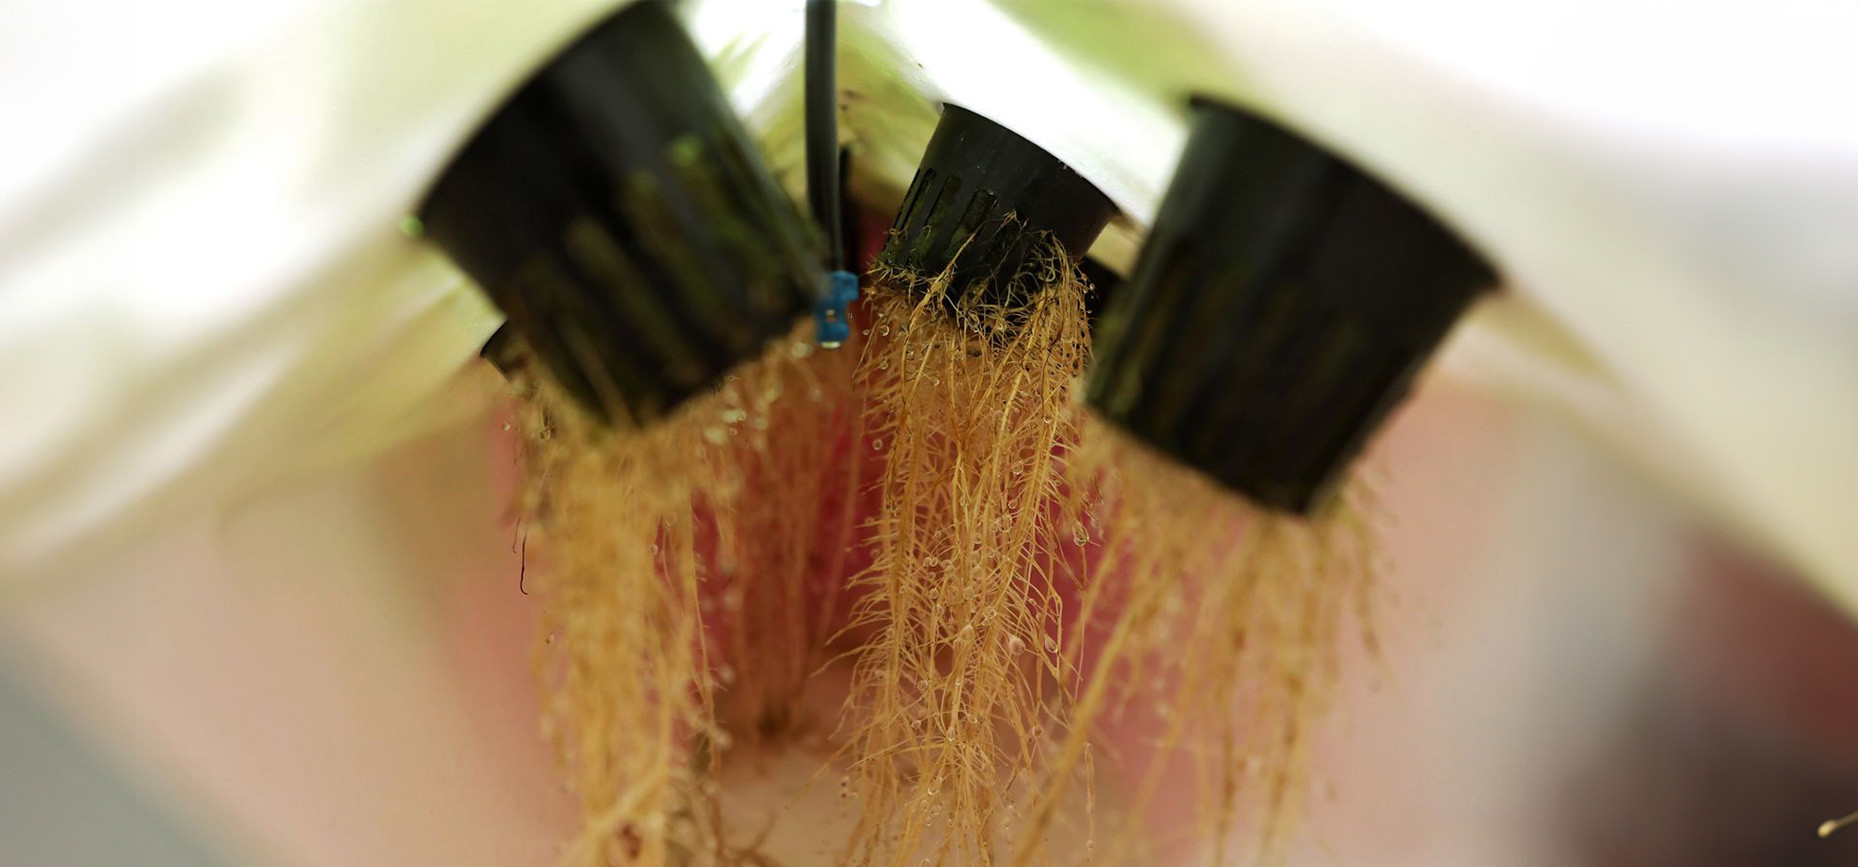 Aeroponics: An innovative growing method for impressive results